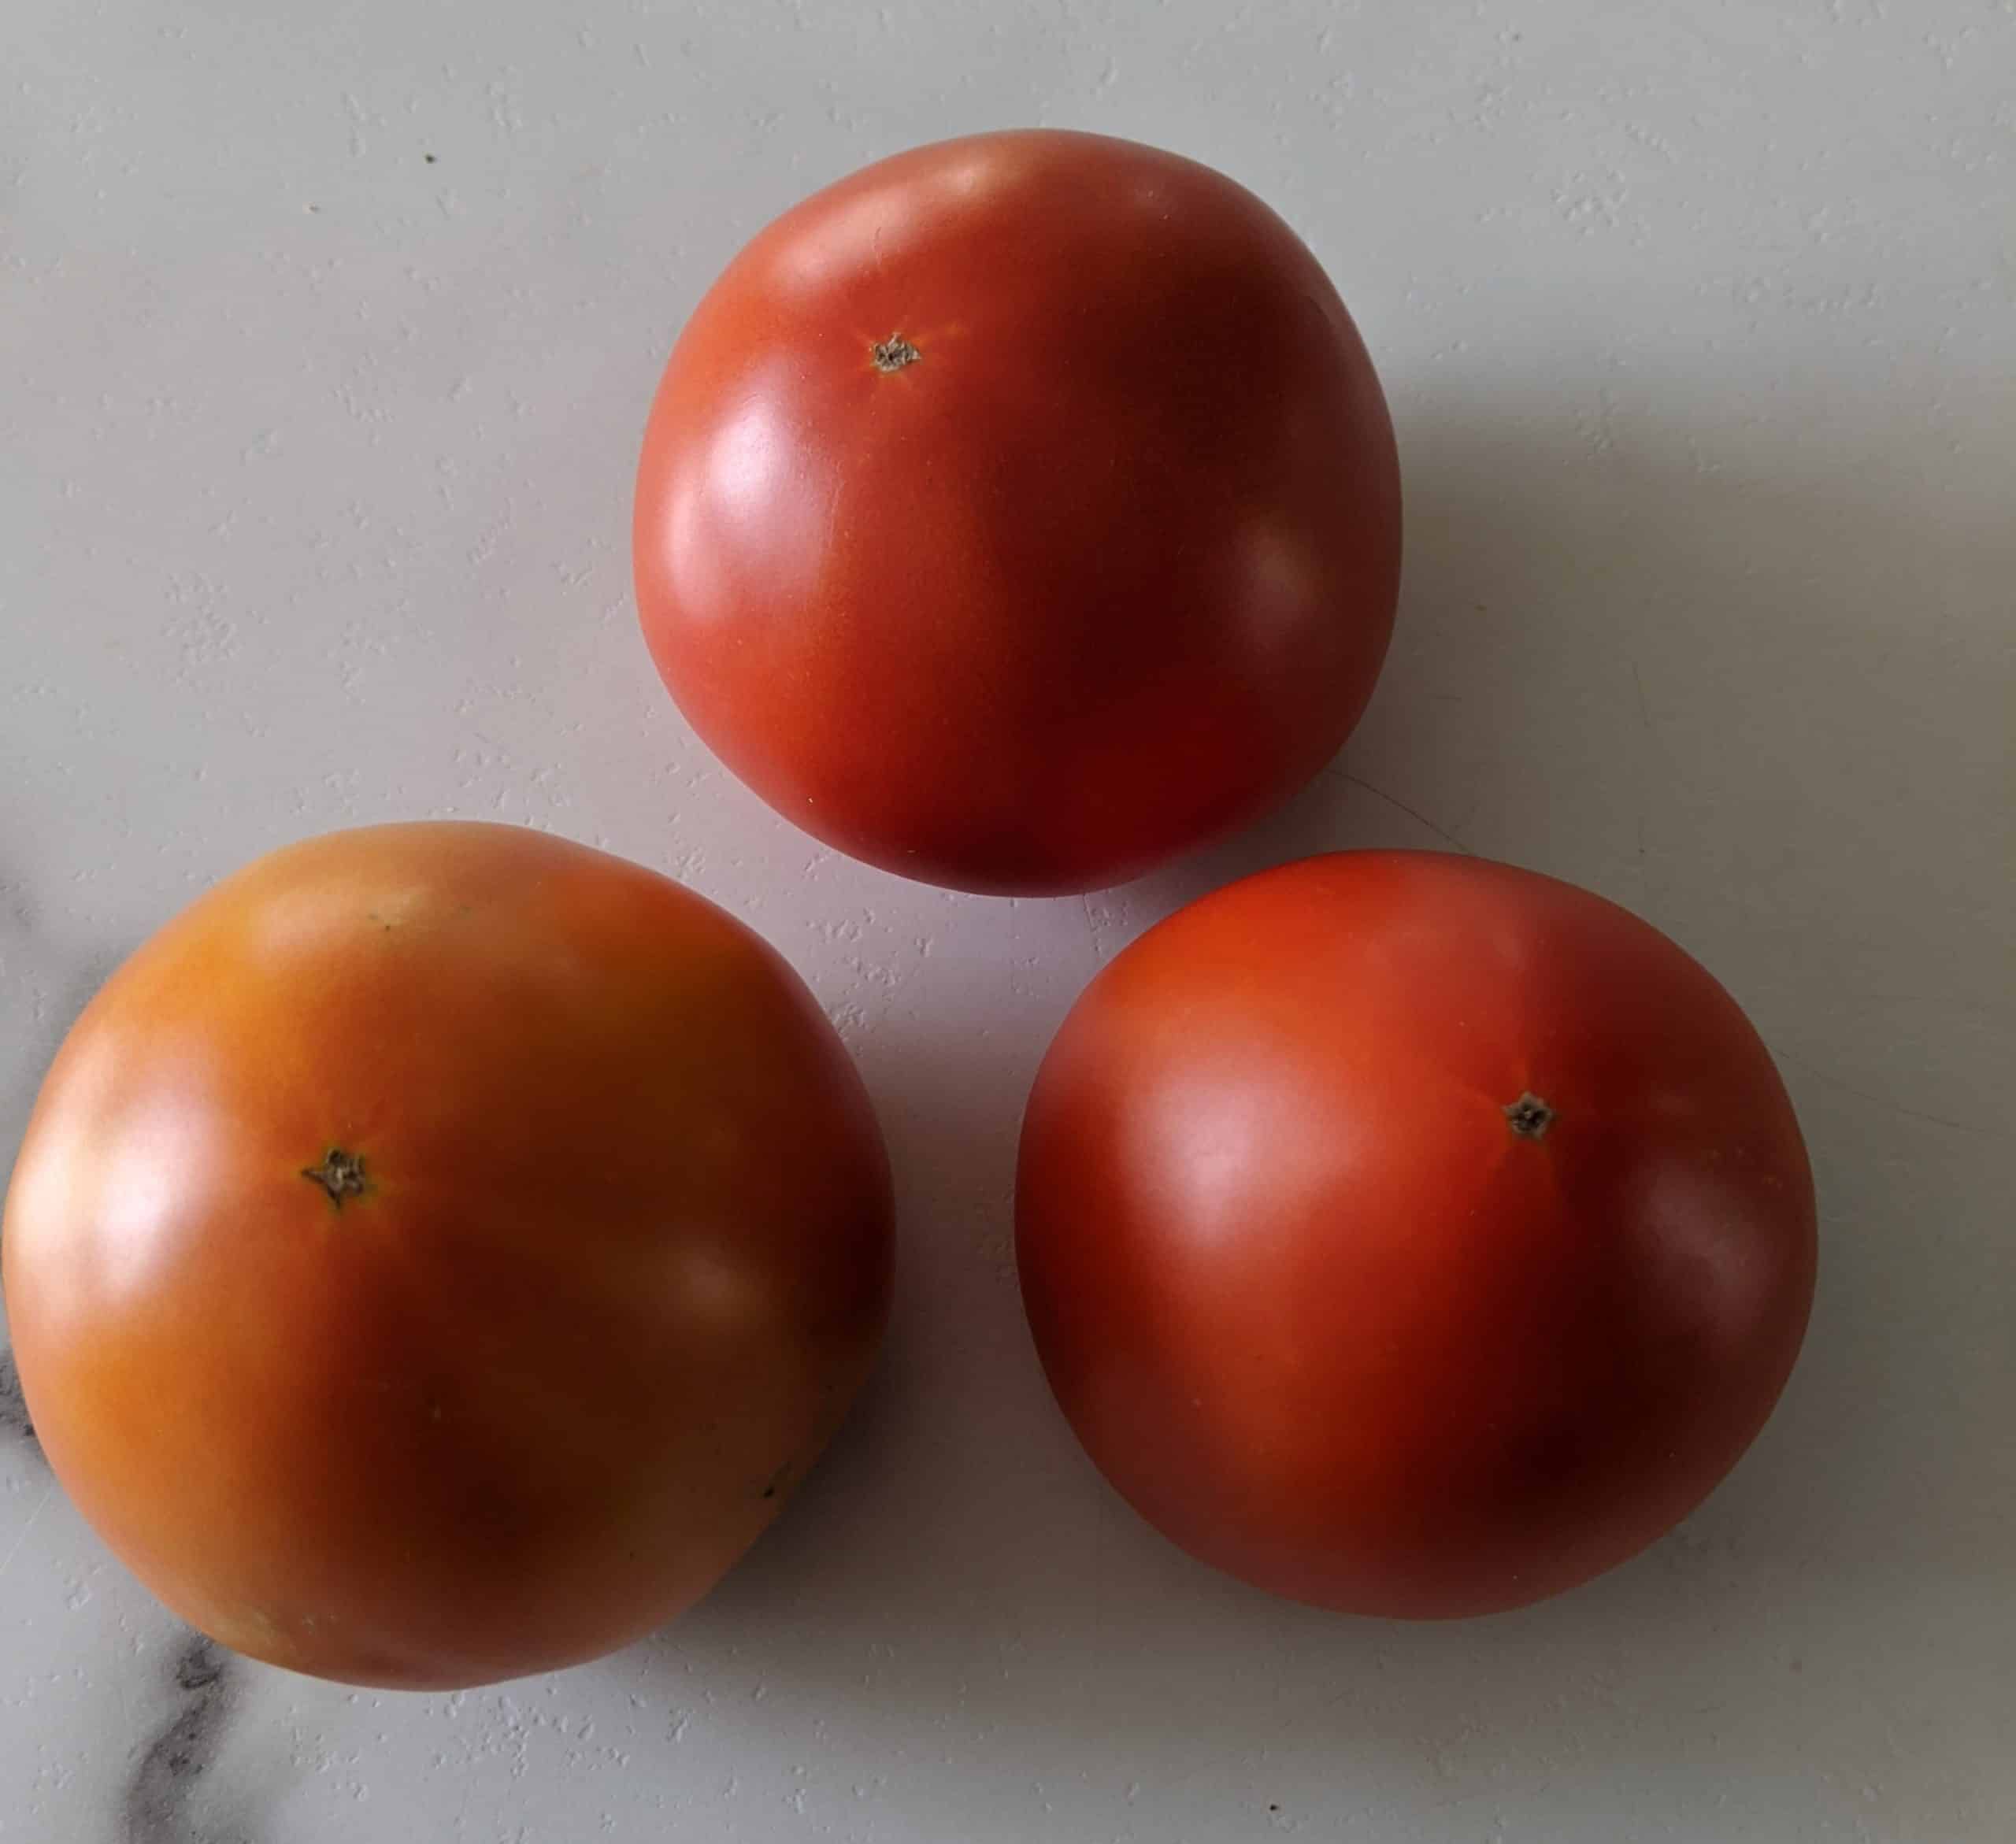 Field tomatoes